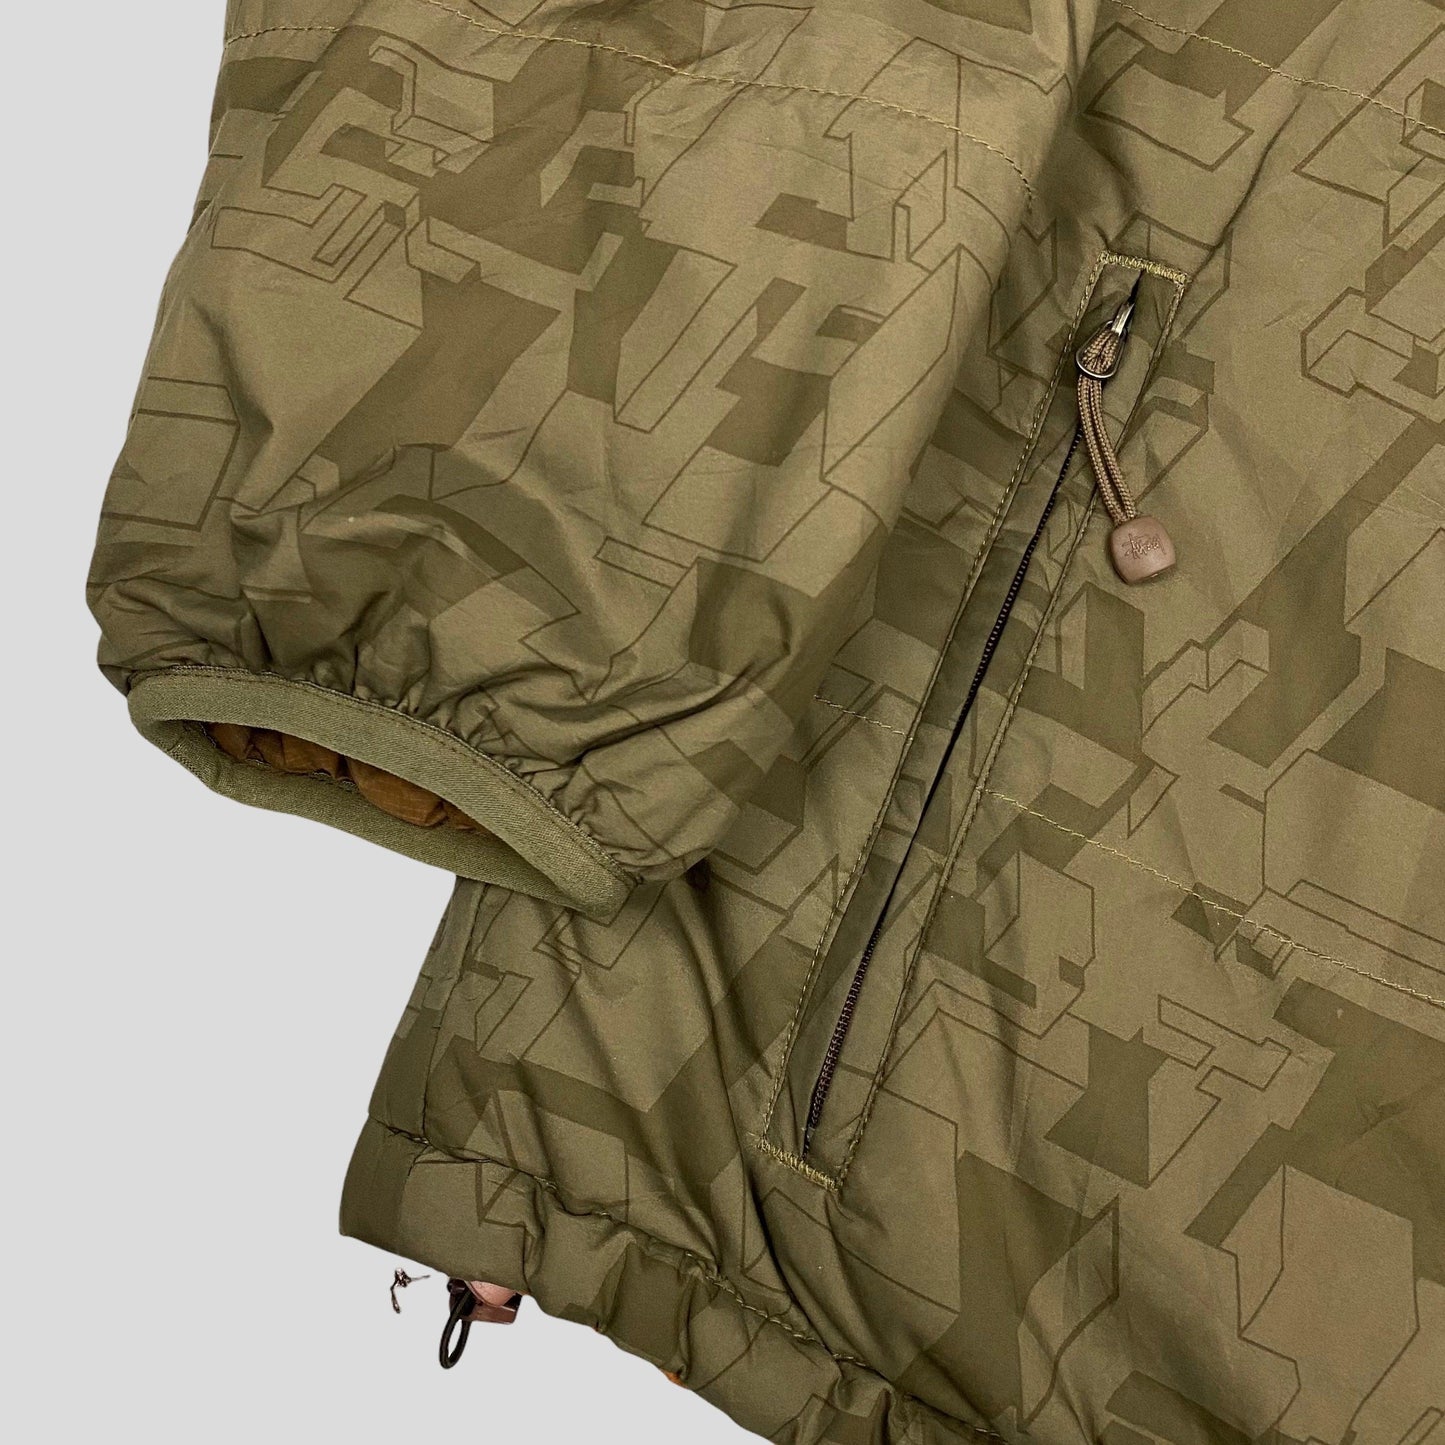 Stussy x Delta 2008 Reversible Puffer - L - Known Source